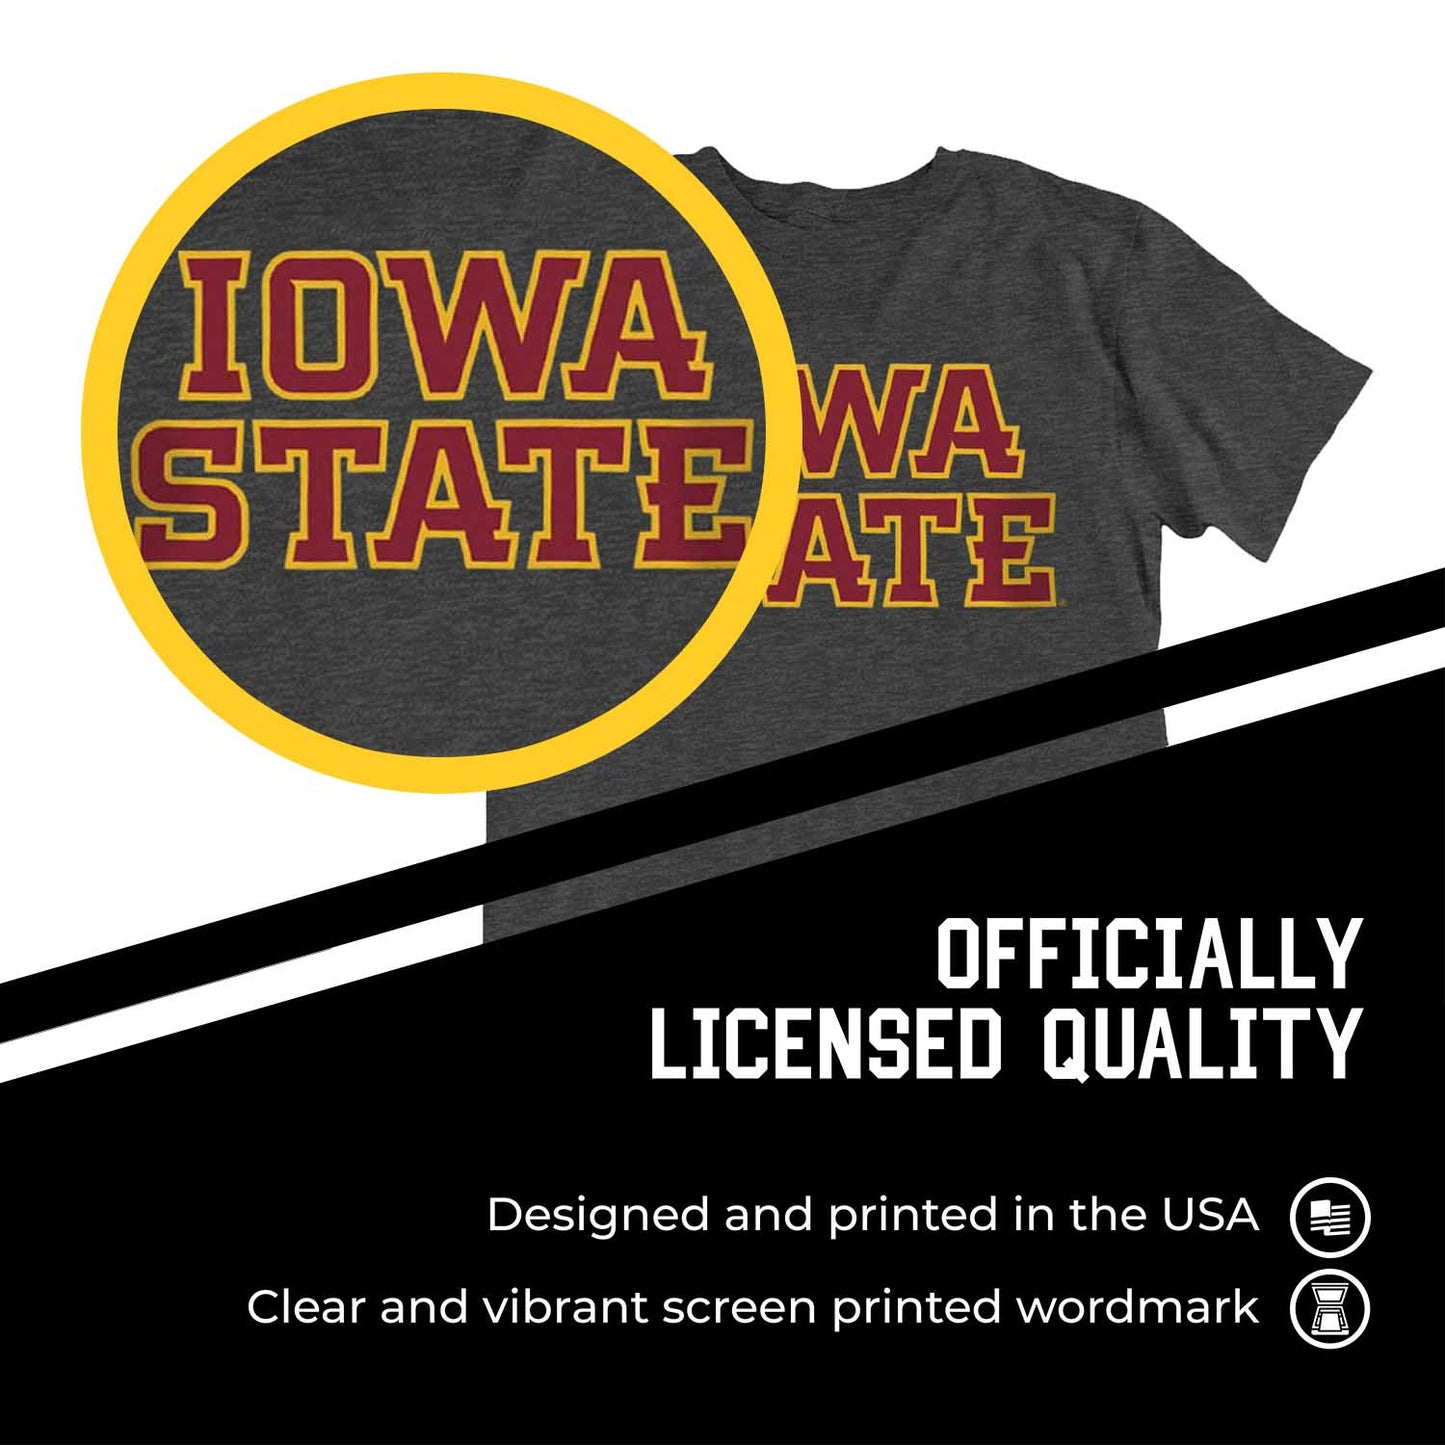 Iowa State Cyclones Campus Colors NCAA Adult Cotton Blend Charcoal Tagless T-Shirt - Charcoal